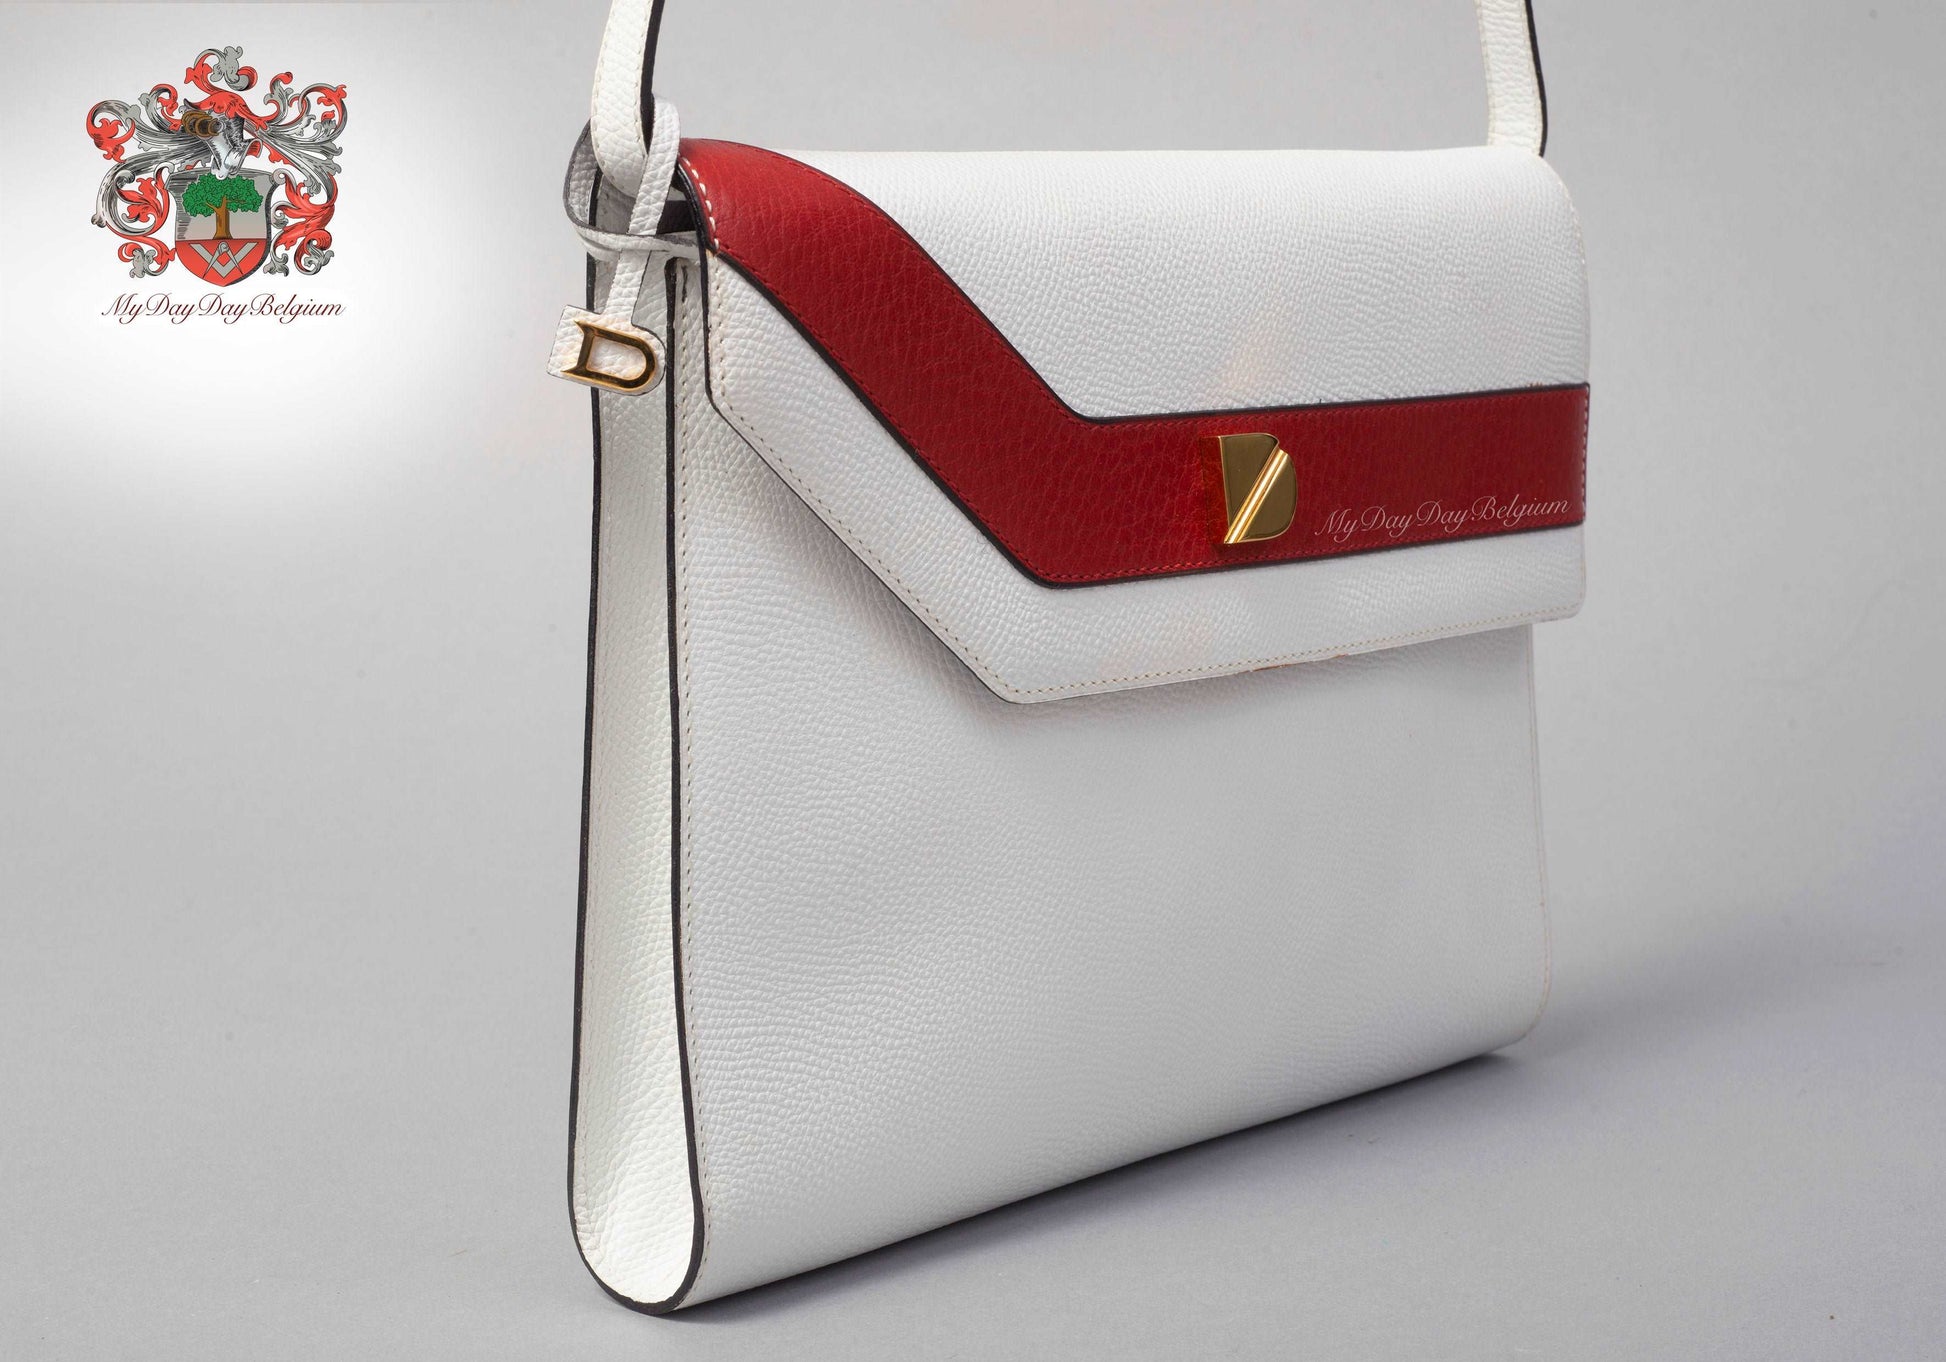 Delvaux vintage crossbody bag in white leather 1984